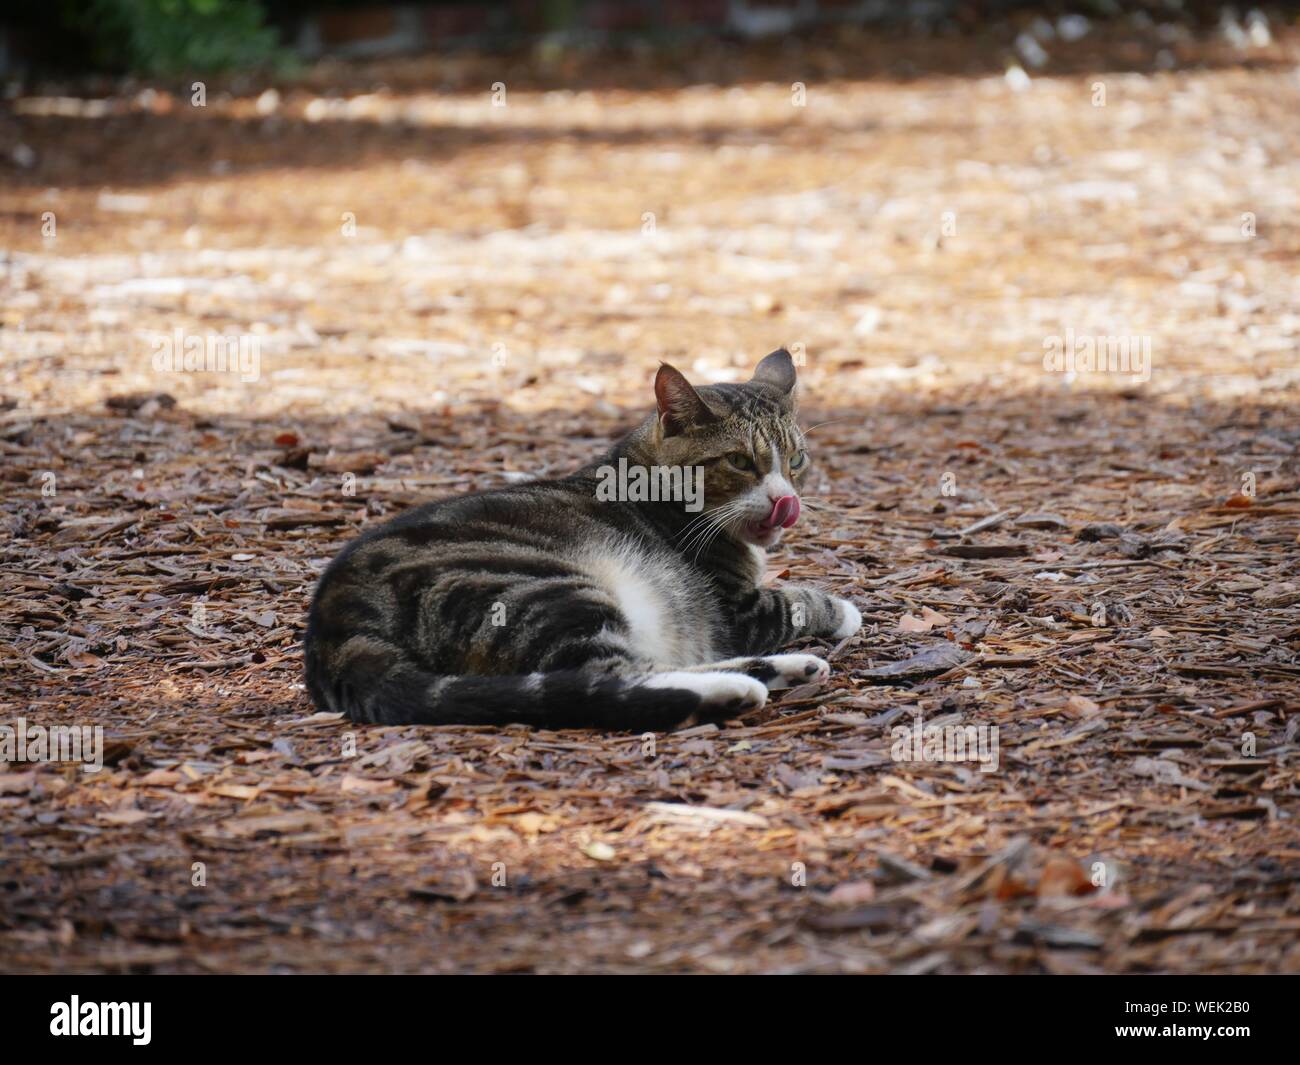 Wide shot of one of the pampered cats at the Hemingway house licking its mouth, Key West, Florida. Stock Photo